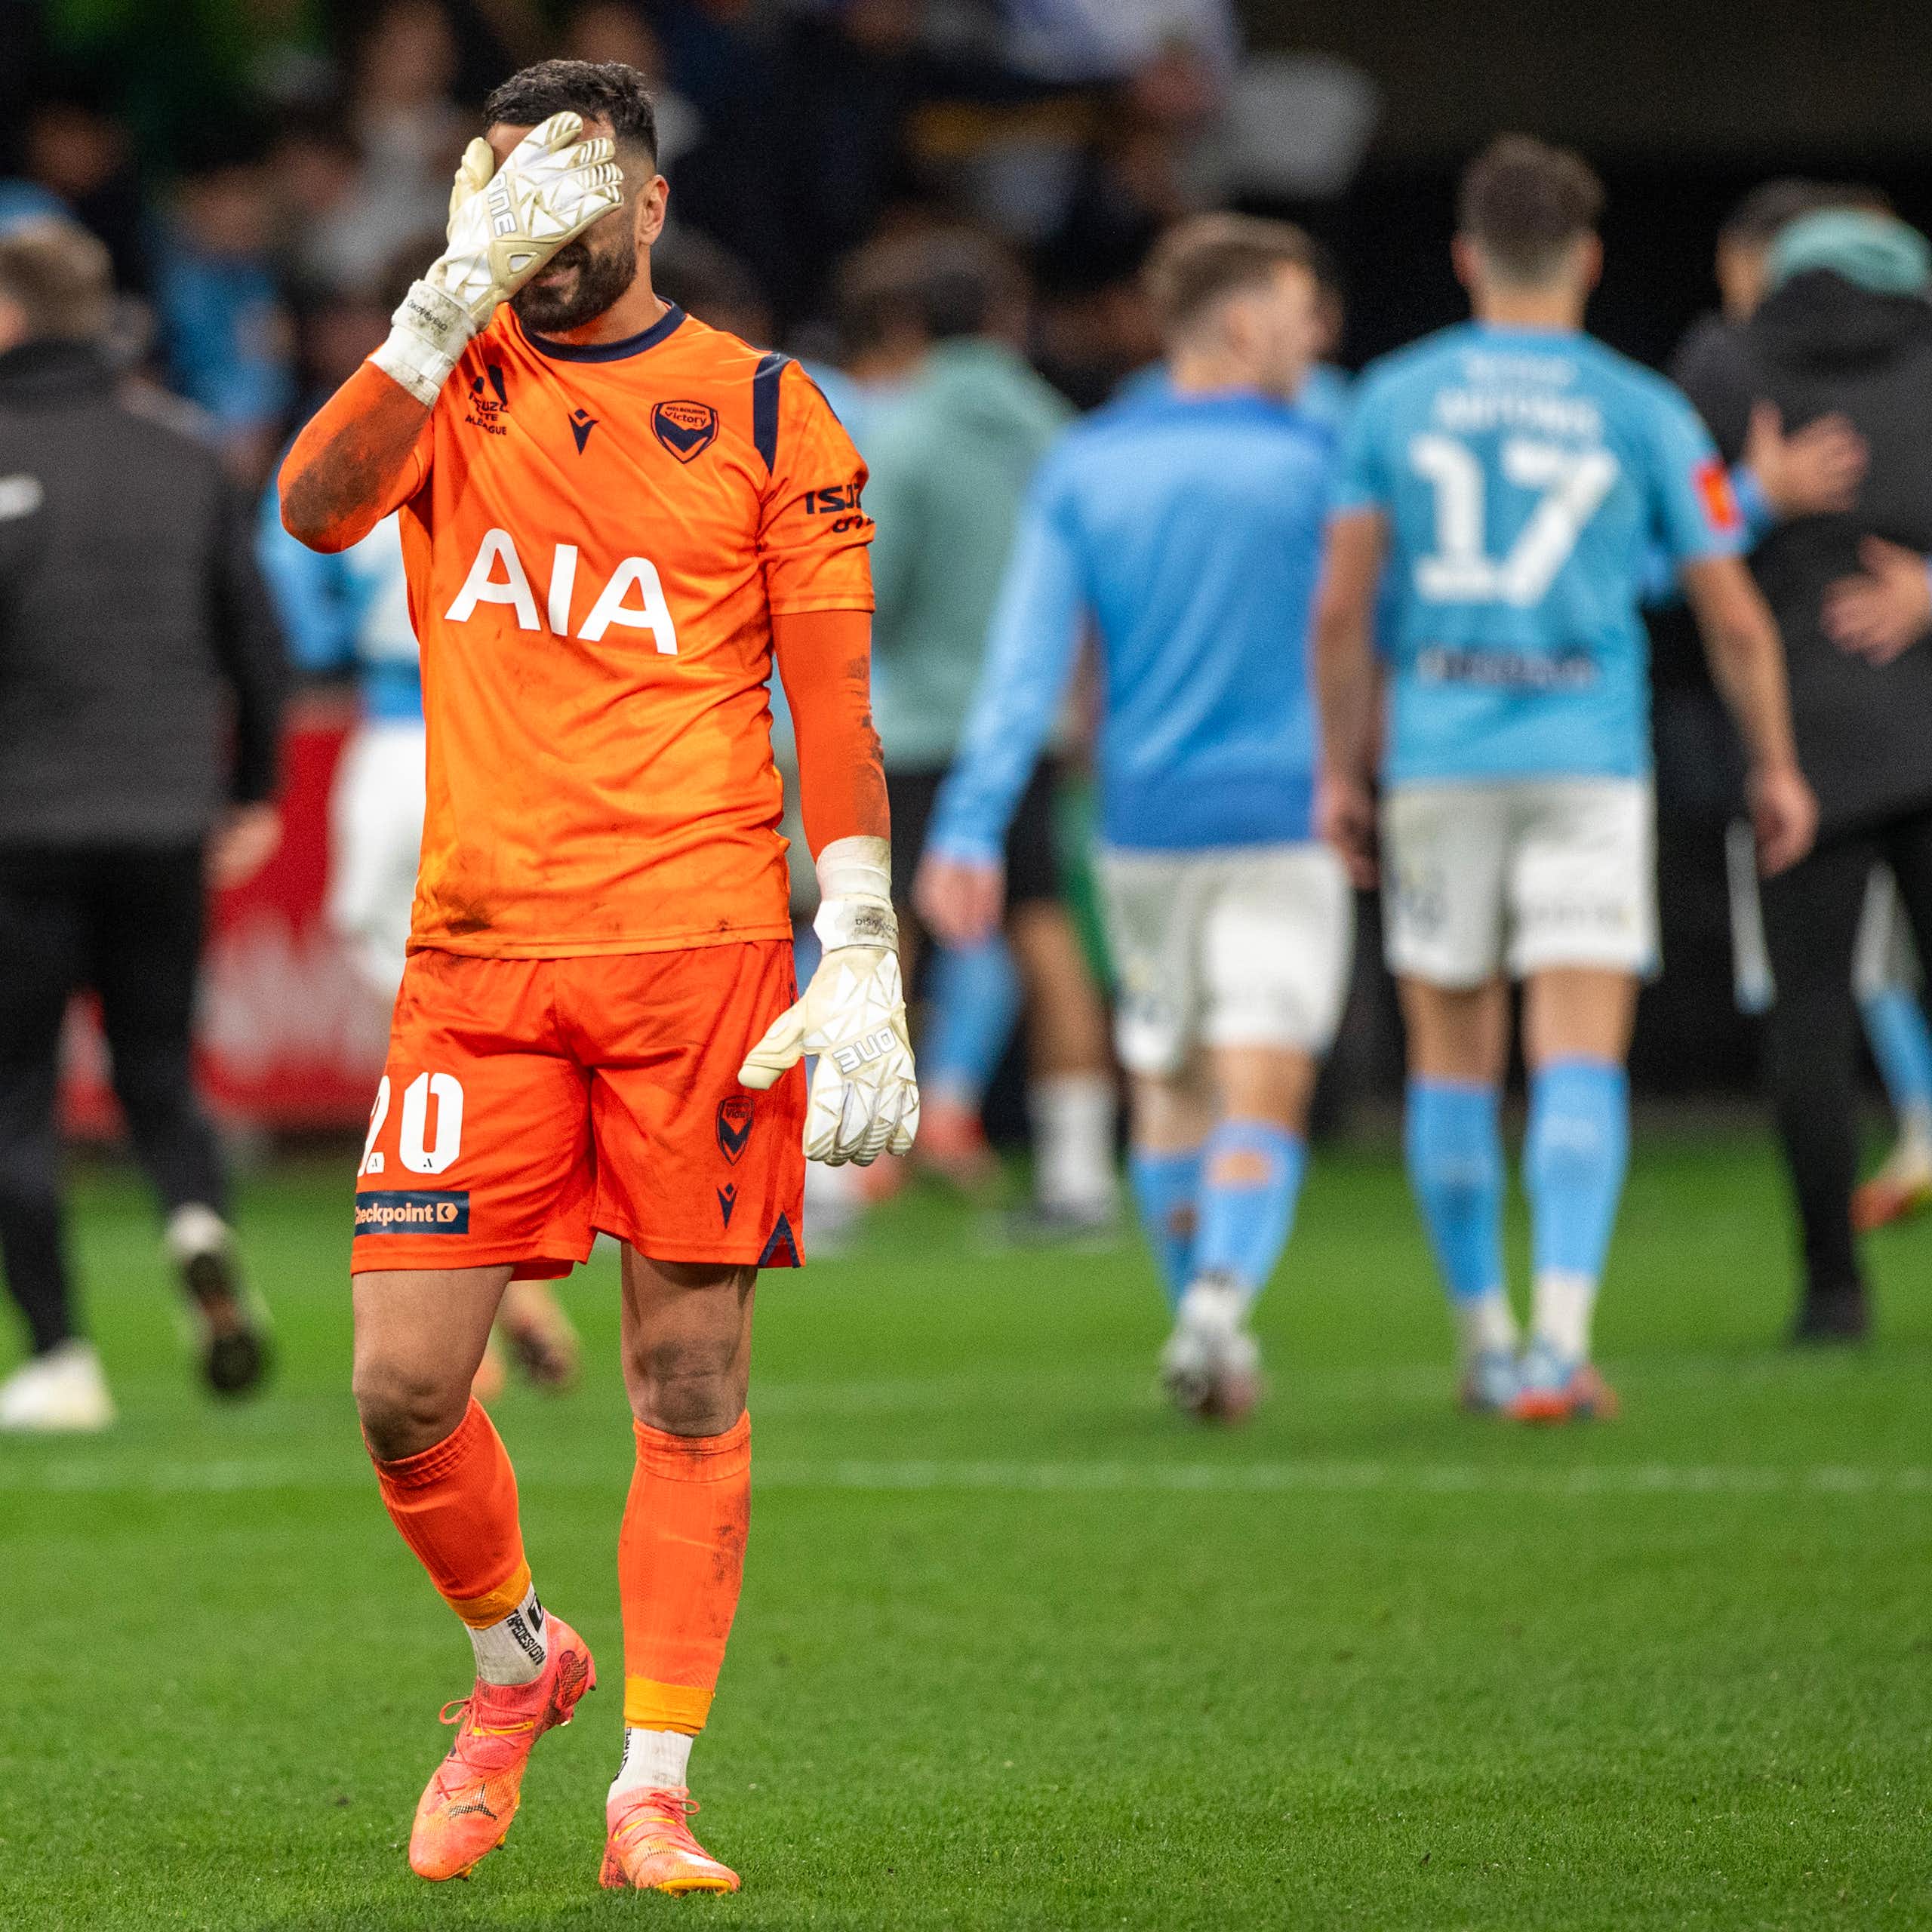 Paul Izzo, Melbourne Victory goalkeeper, walks off dejectedly after a loss